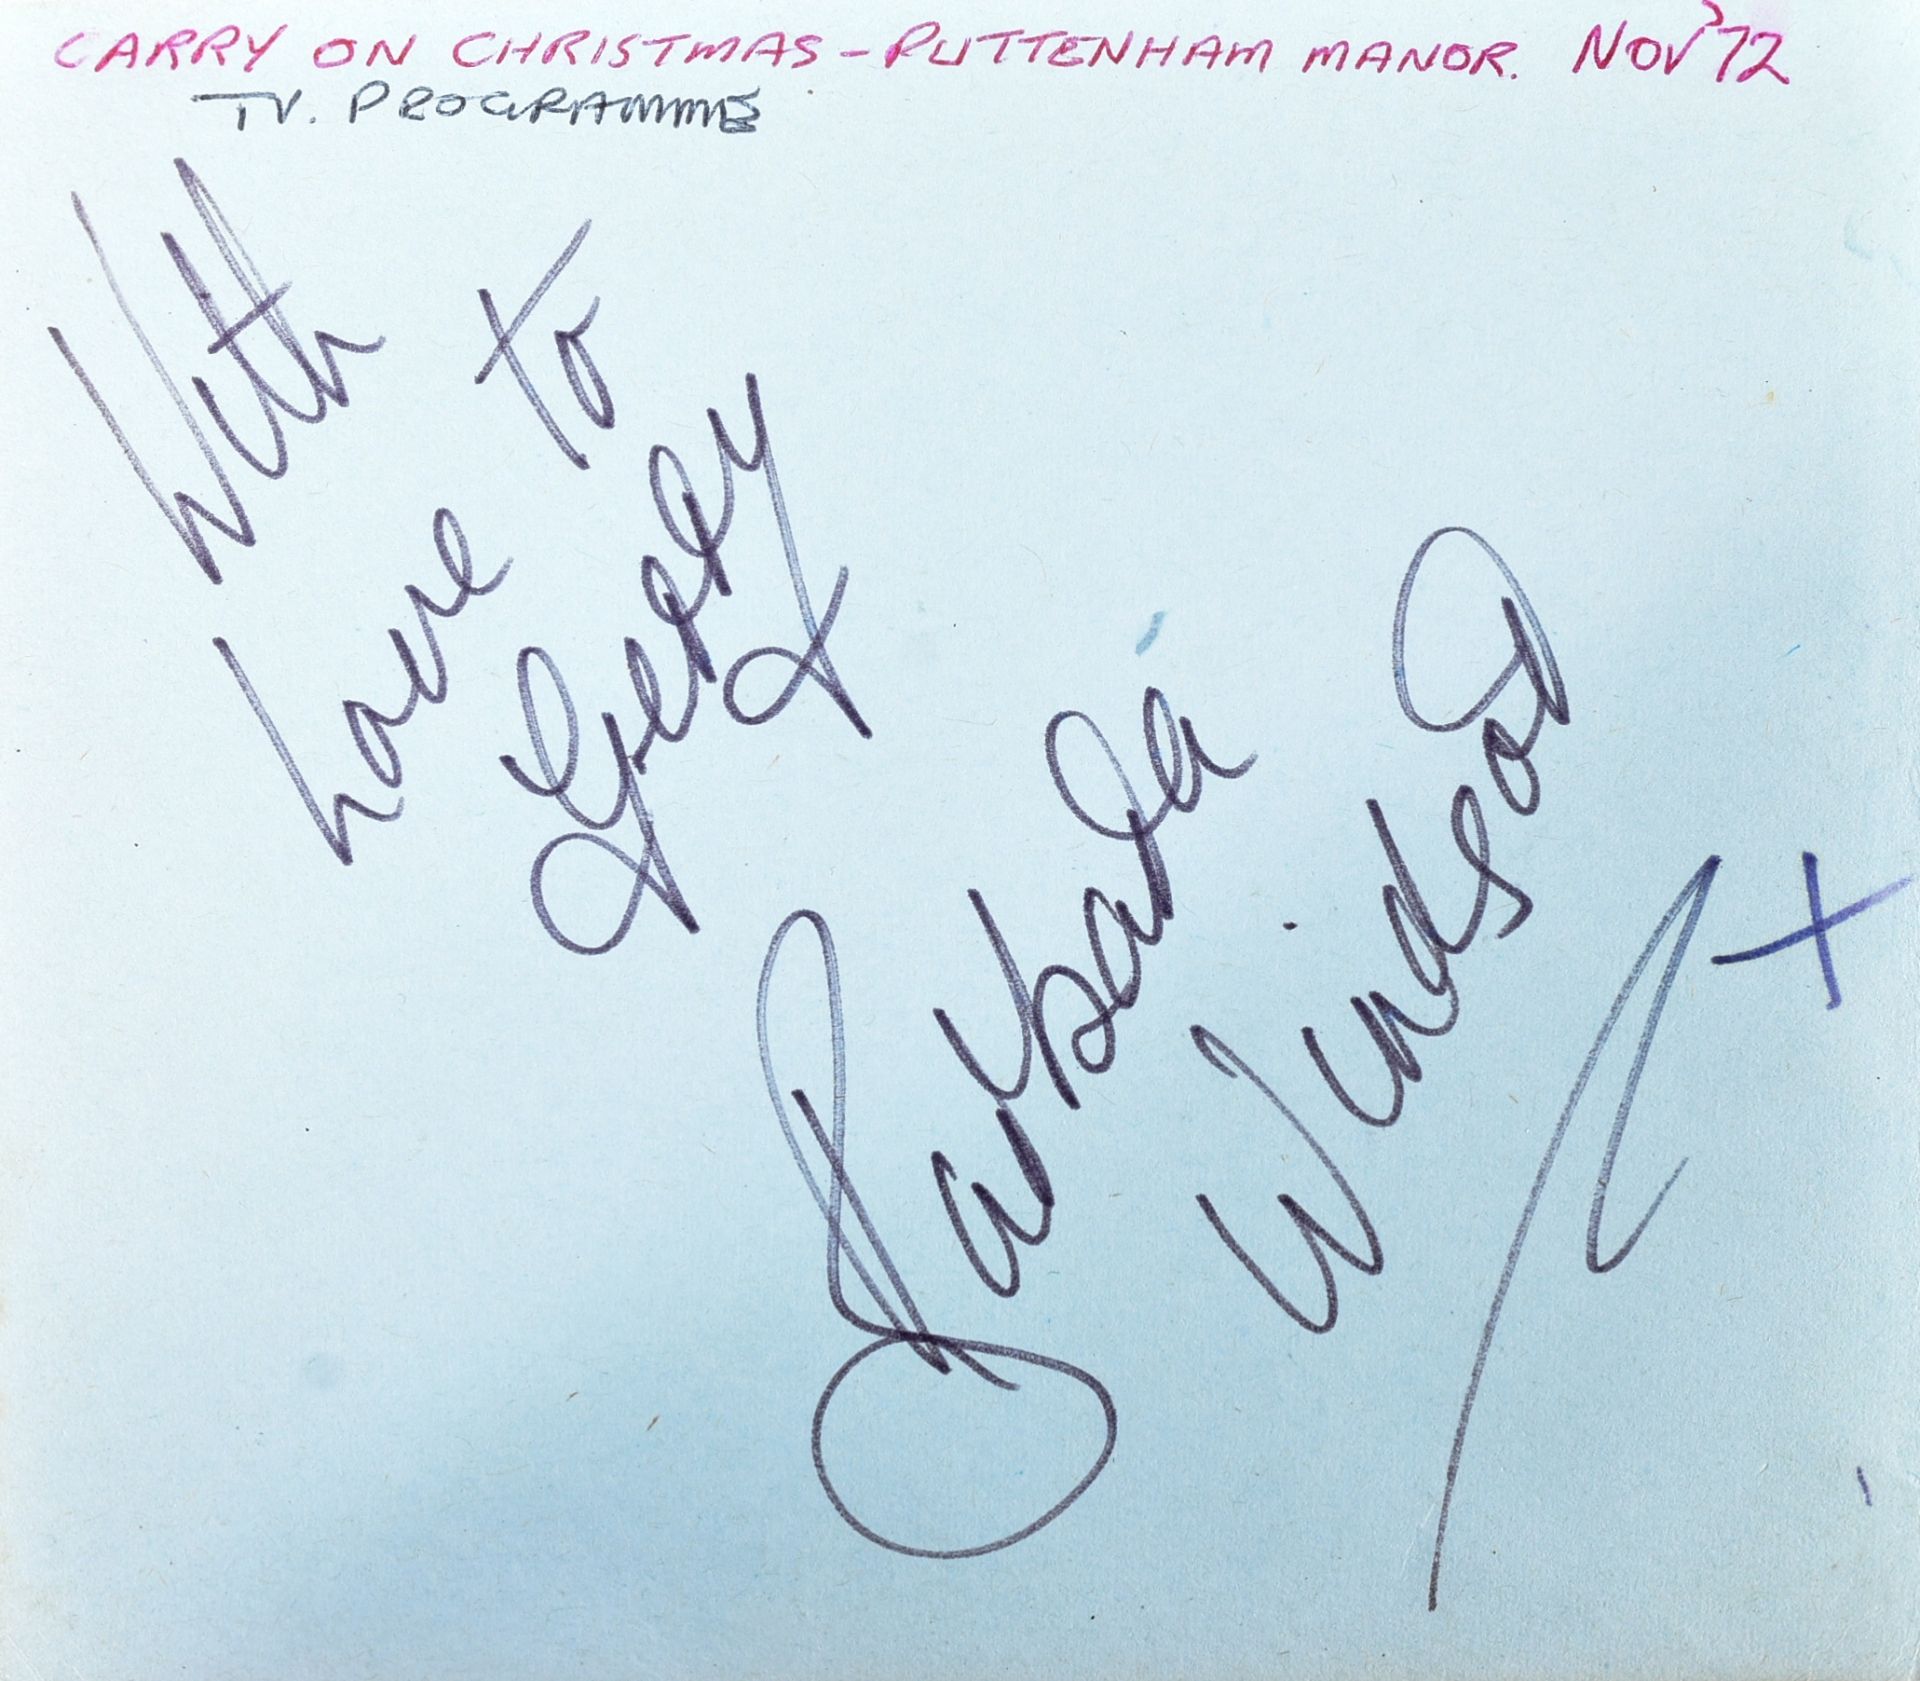 GERALD WHITNEY COLLECTION (CAMERA MAN) - CARRY ON AUTOGRAPHS - Image 4 of 5